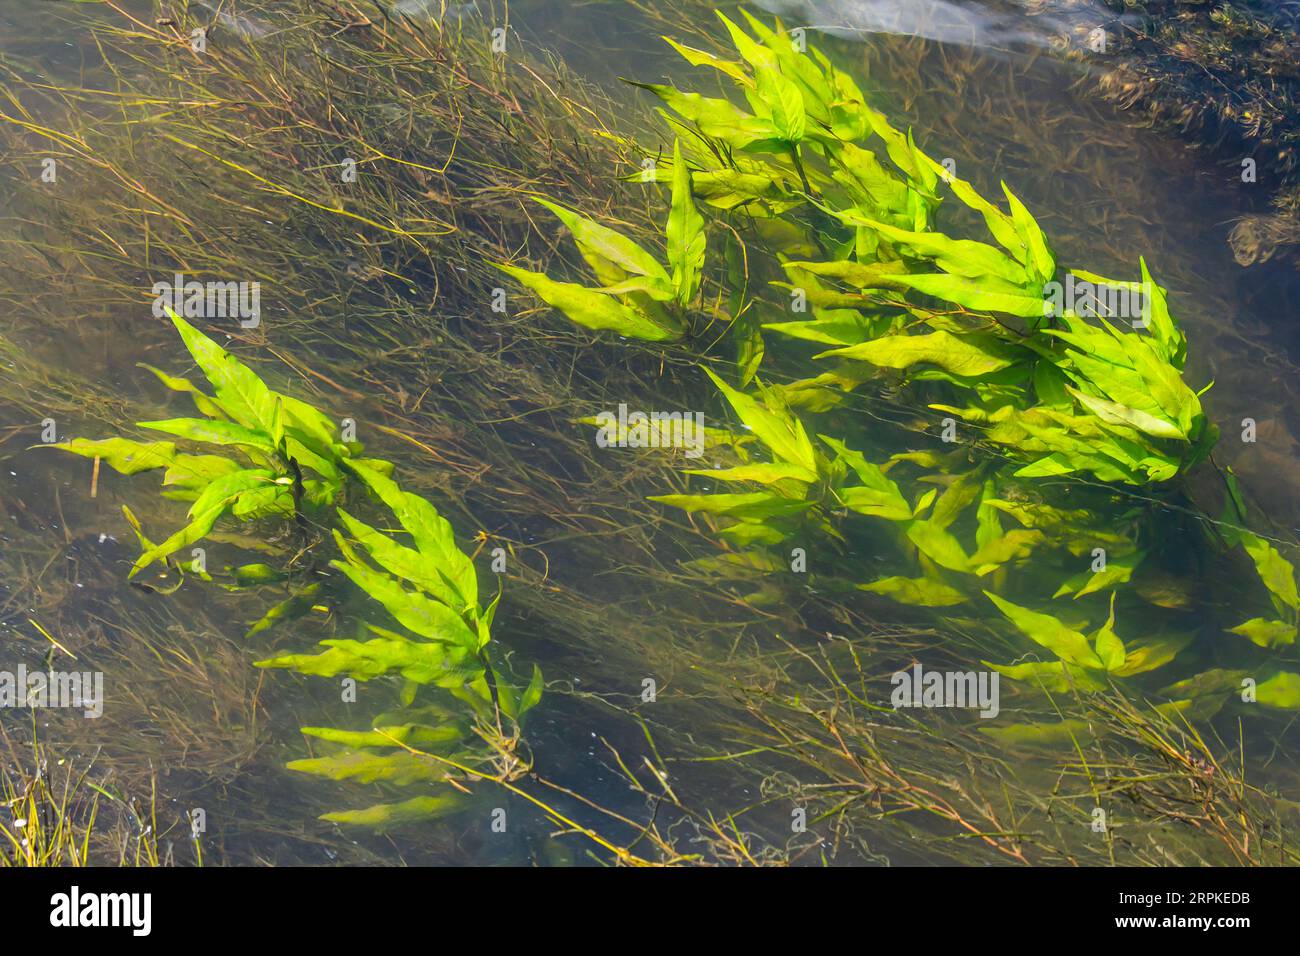 Aquatic plants. Freshwater algae background. Photographer's shadow. Ecological concept. Blur under water. Stock Photo